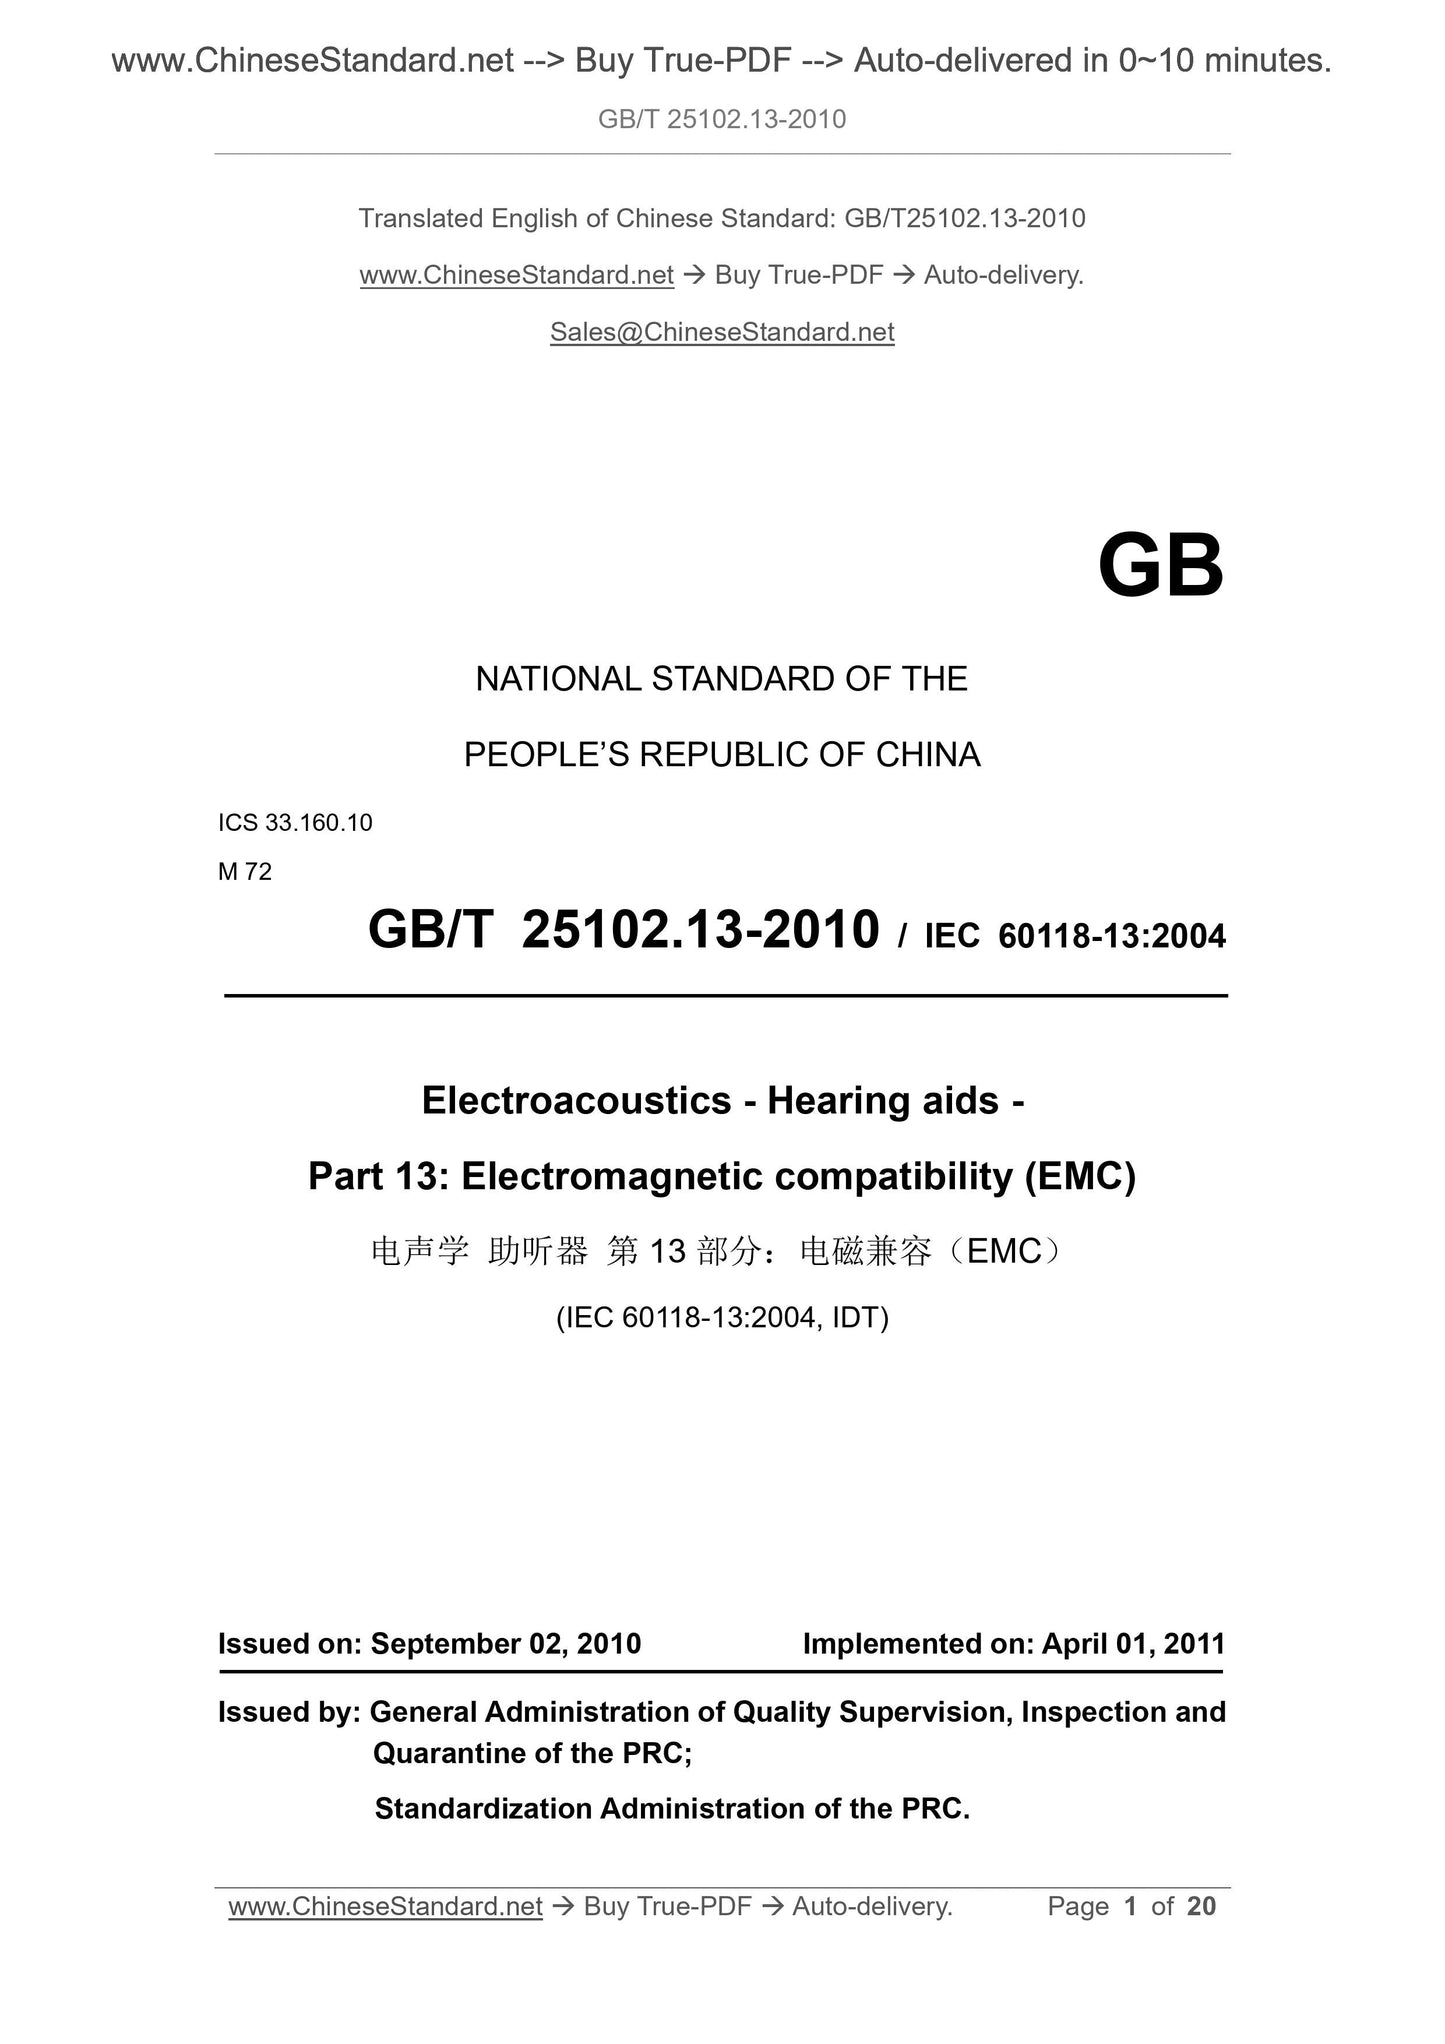 GB/T 25102.13-2010 Page 1